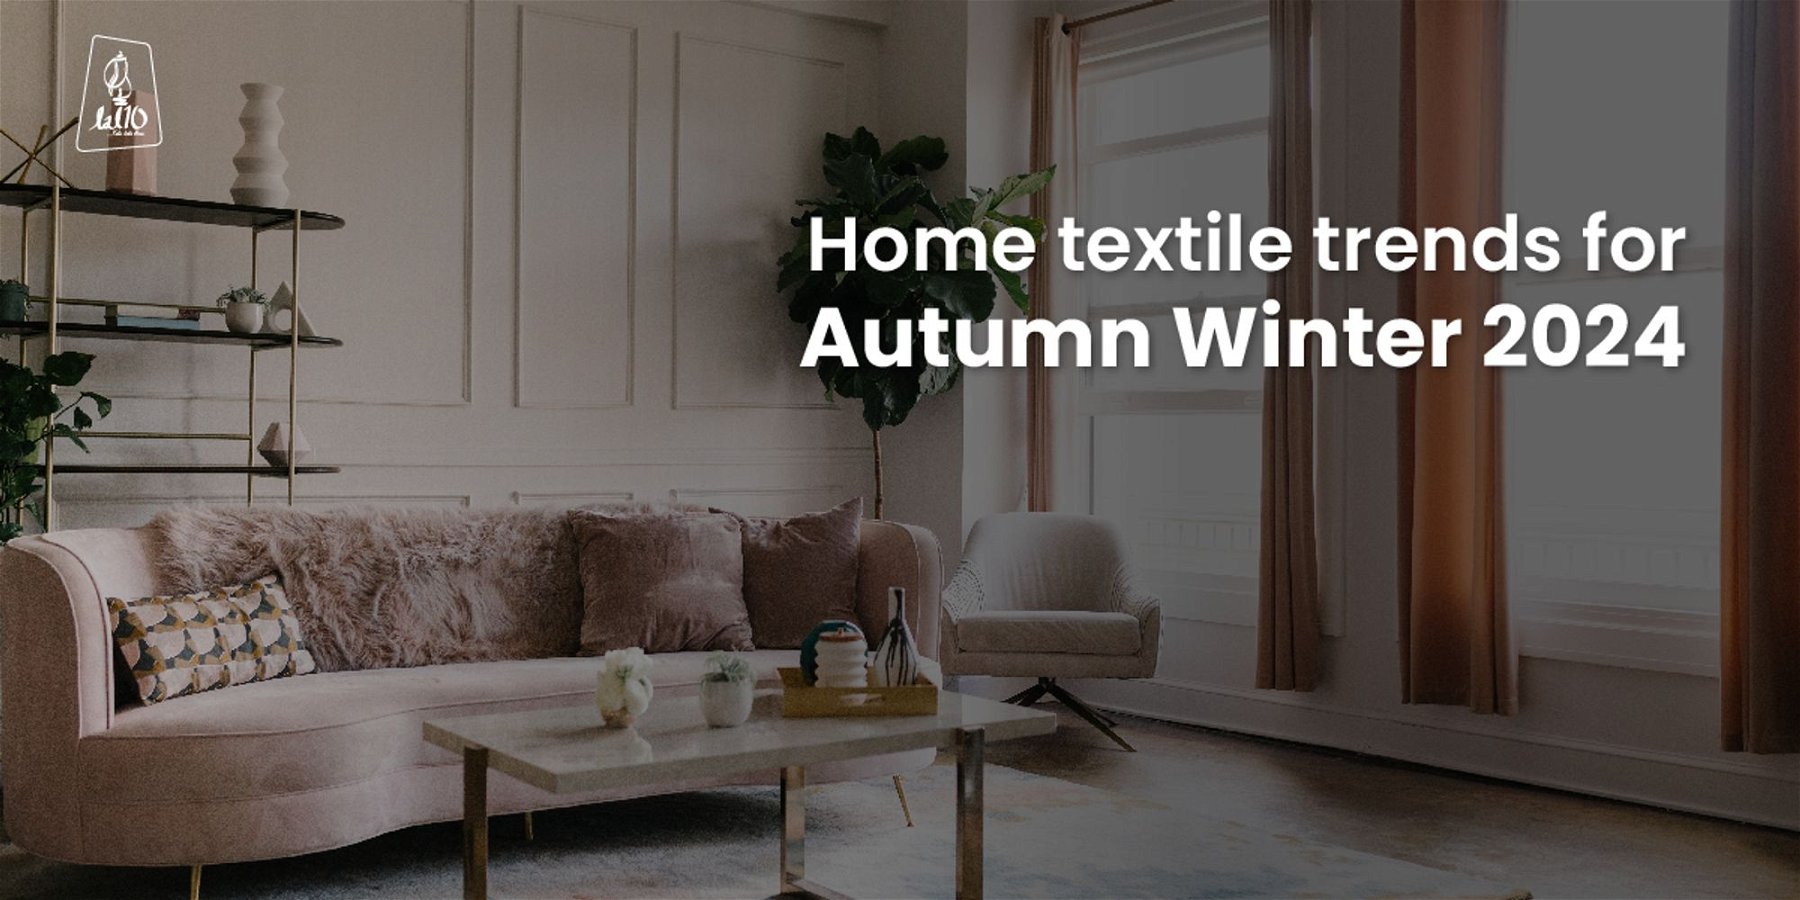 Home textile trends for Autumn-Winter 2024